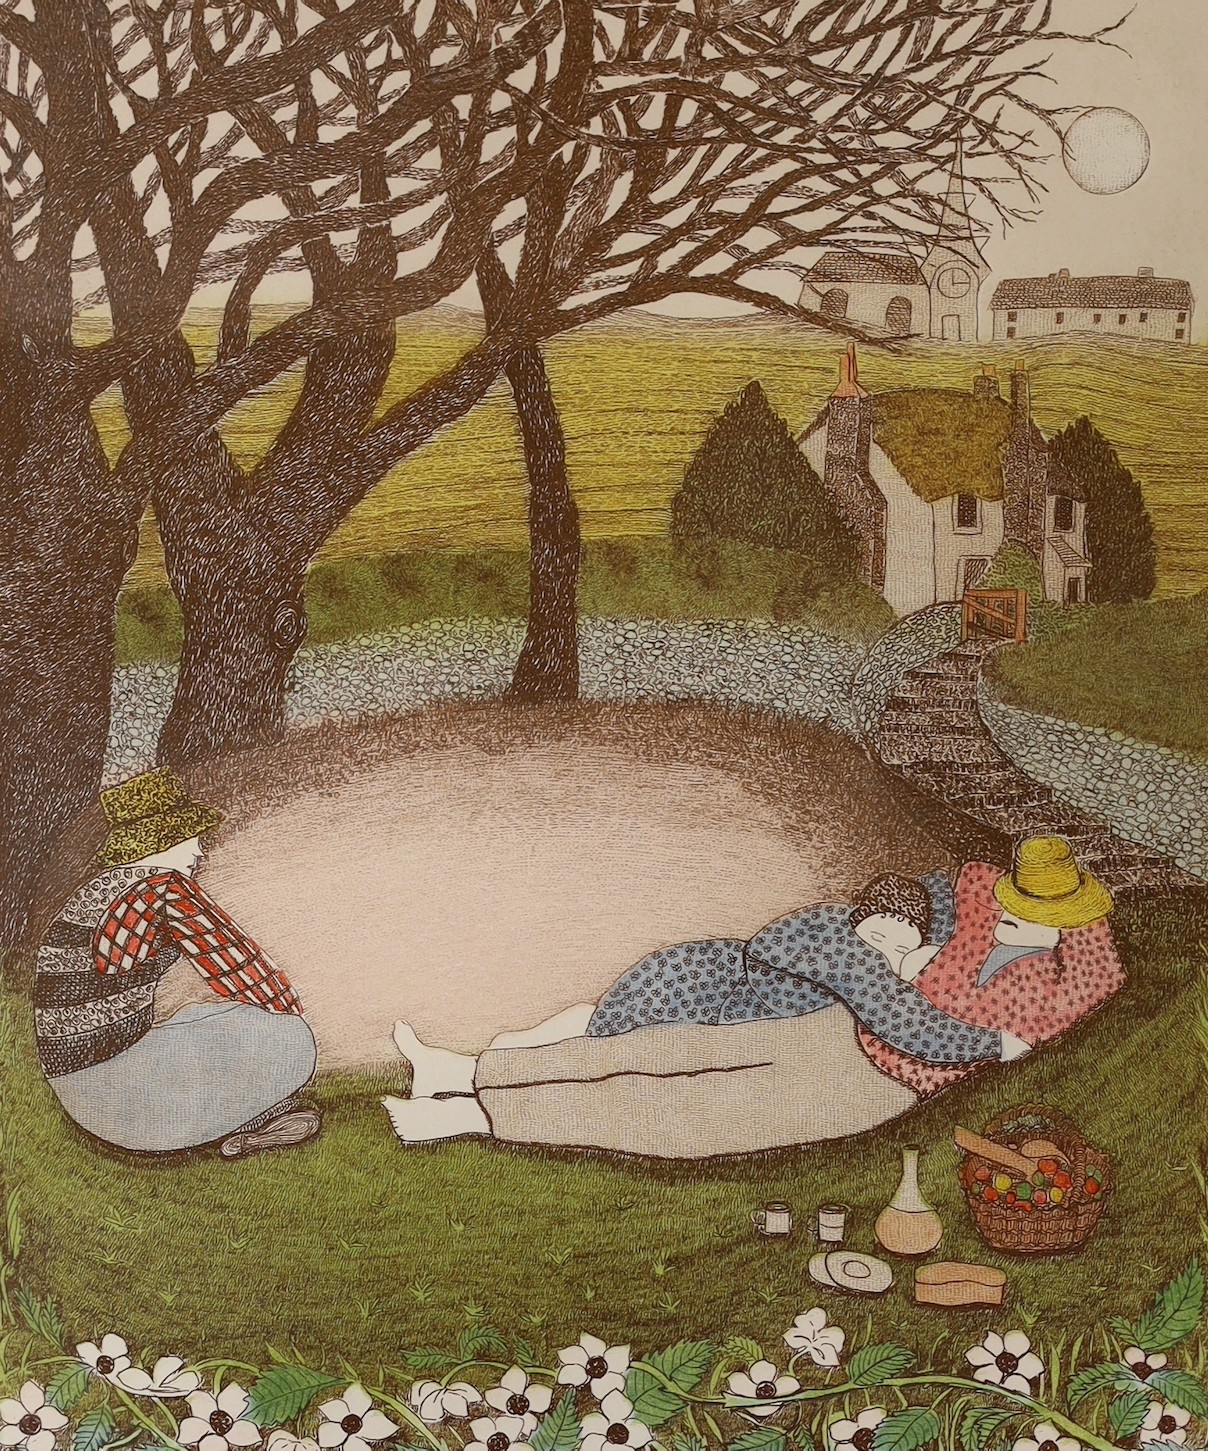 Gillian Lawson (1936-), two limited edition etchings, "The Picnic" and "Sunday Afternoon", signed in - Image 3 of 3